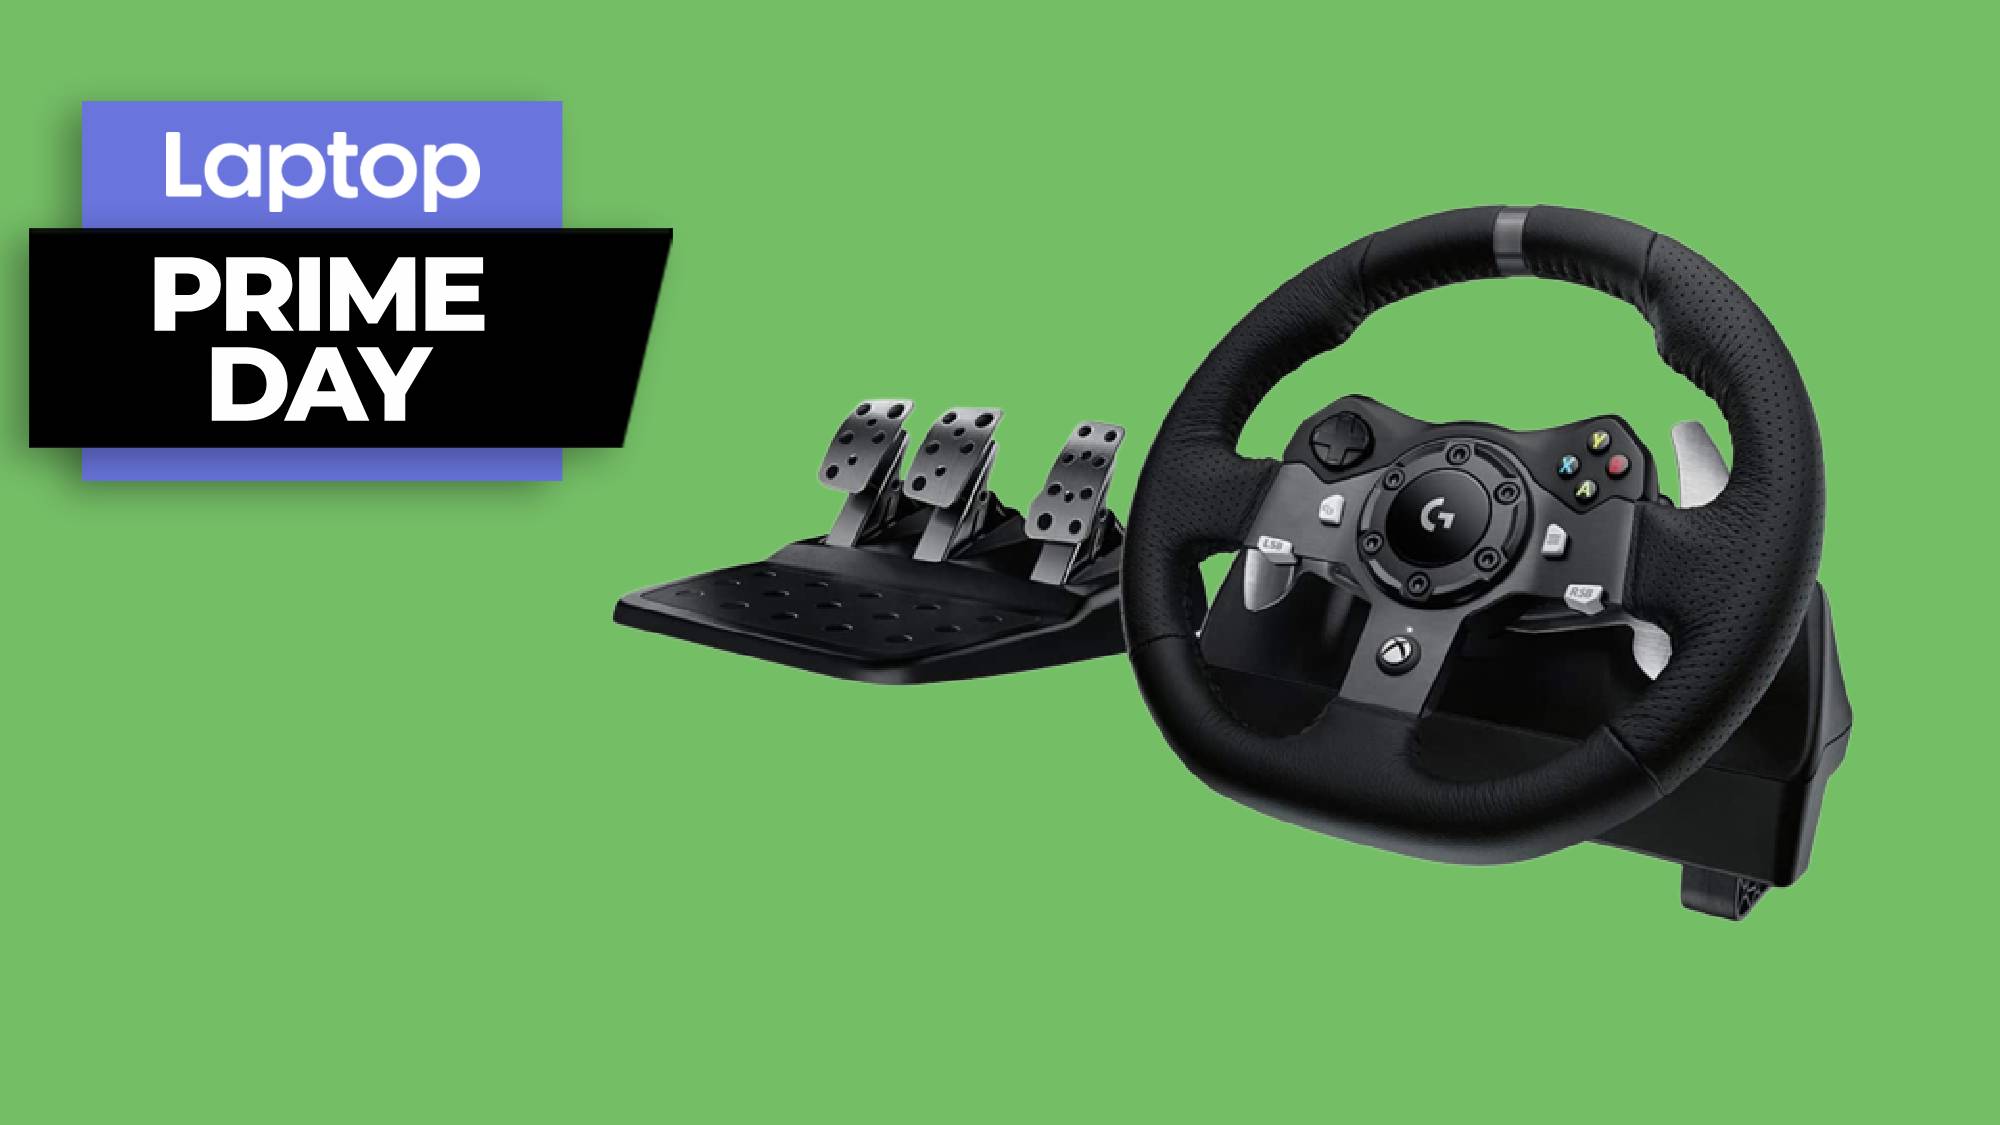 Logitech G920 Driving Force racing wheel falls to $189 in Prime